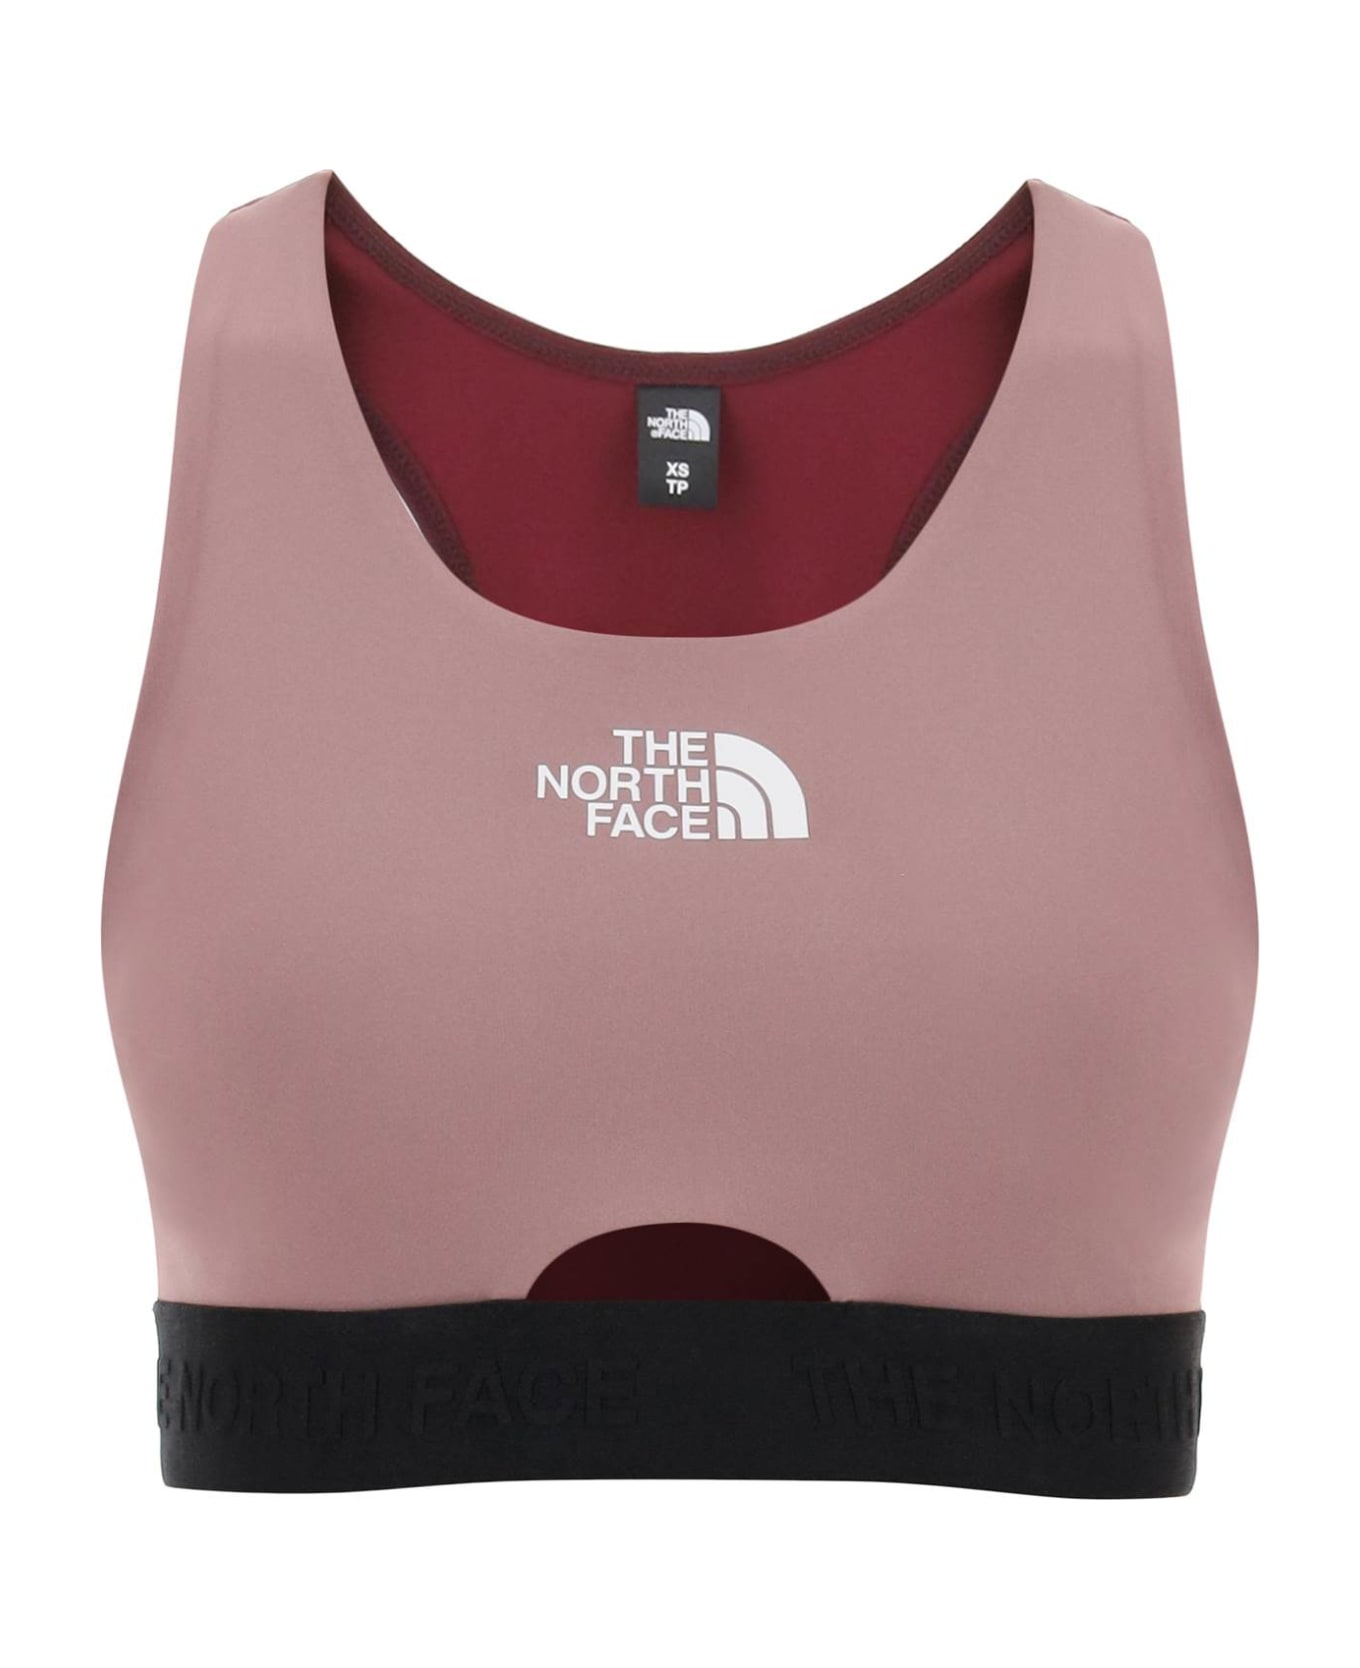 The North Face Mountain Athletics Sports Top - FAWN GREY BOYSENBERRY (Purple) ブラジャー